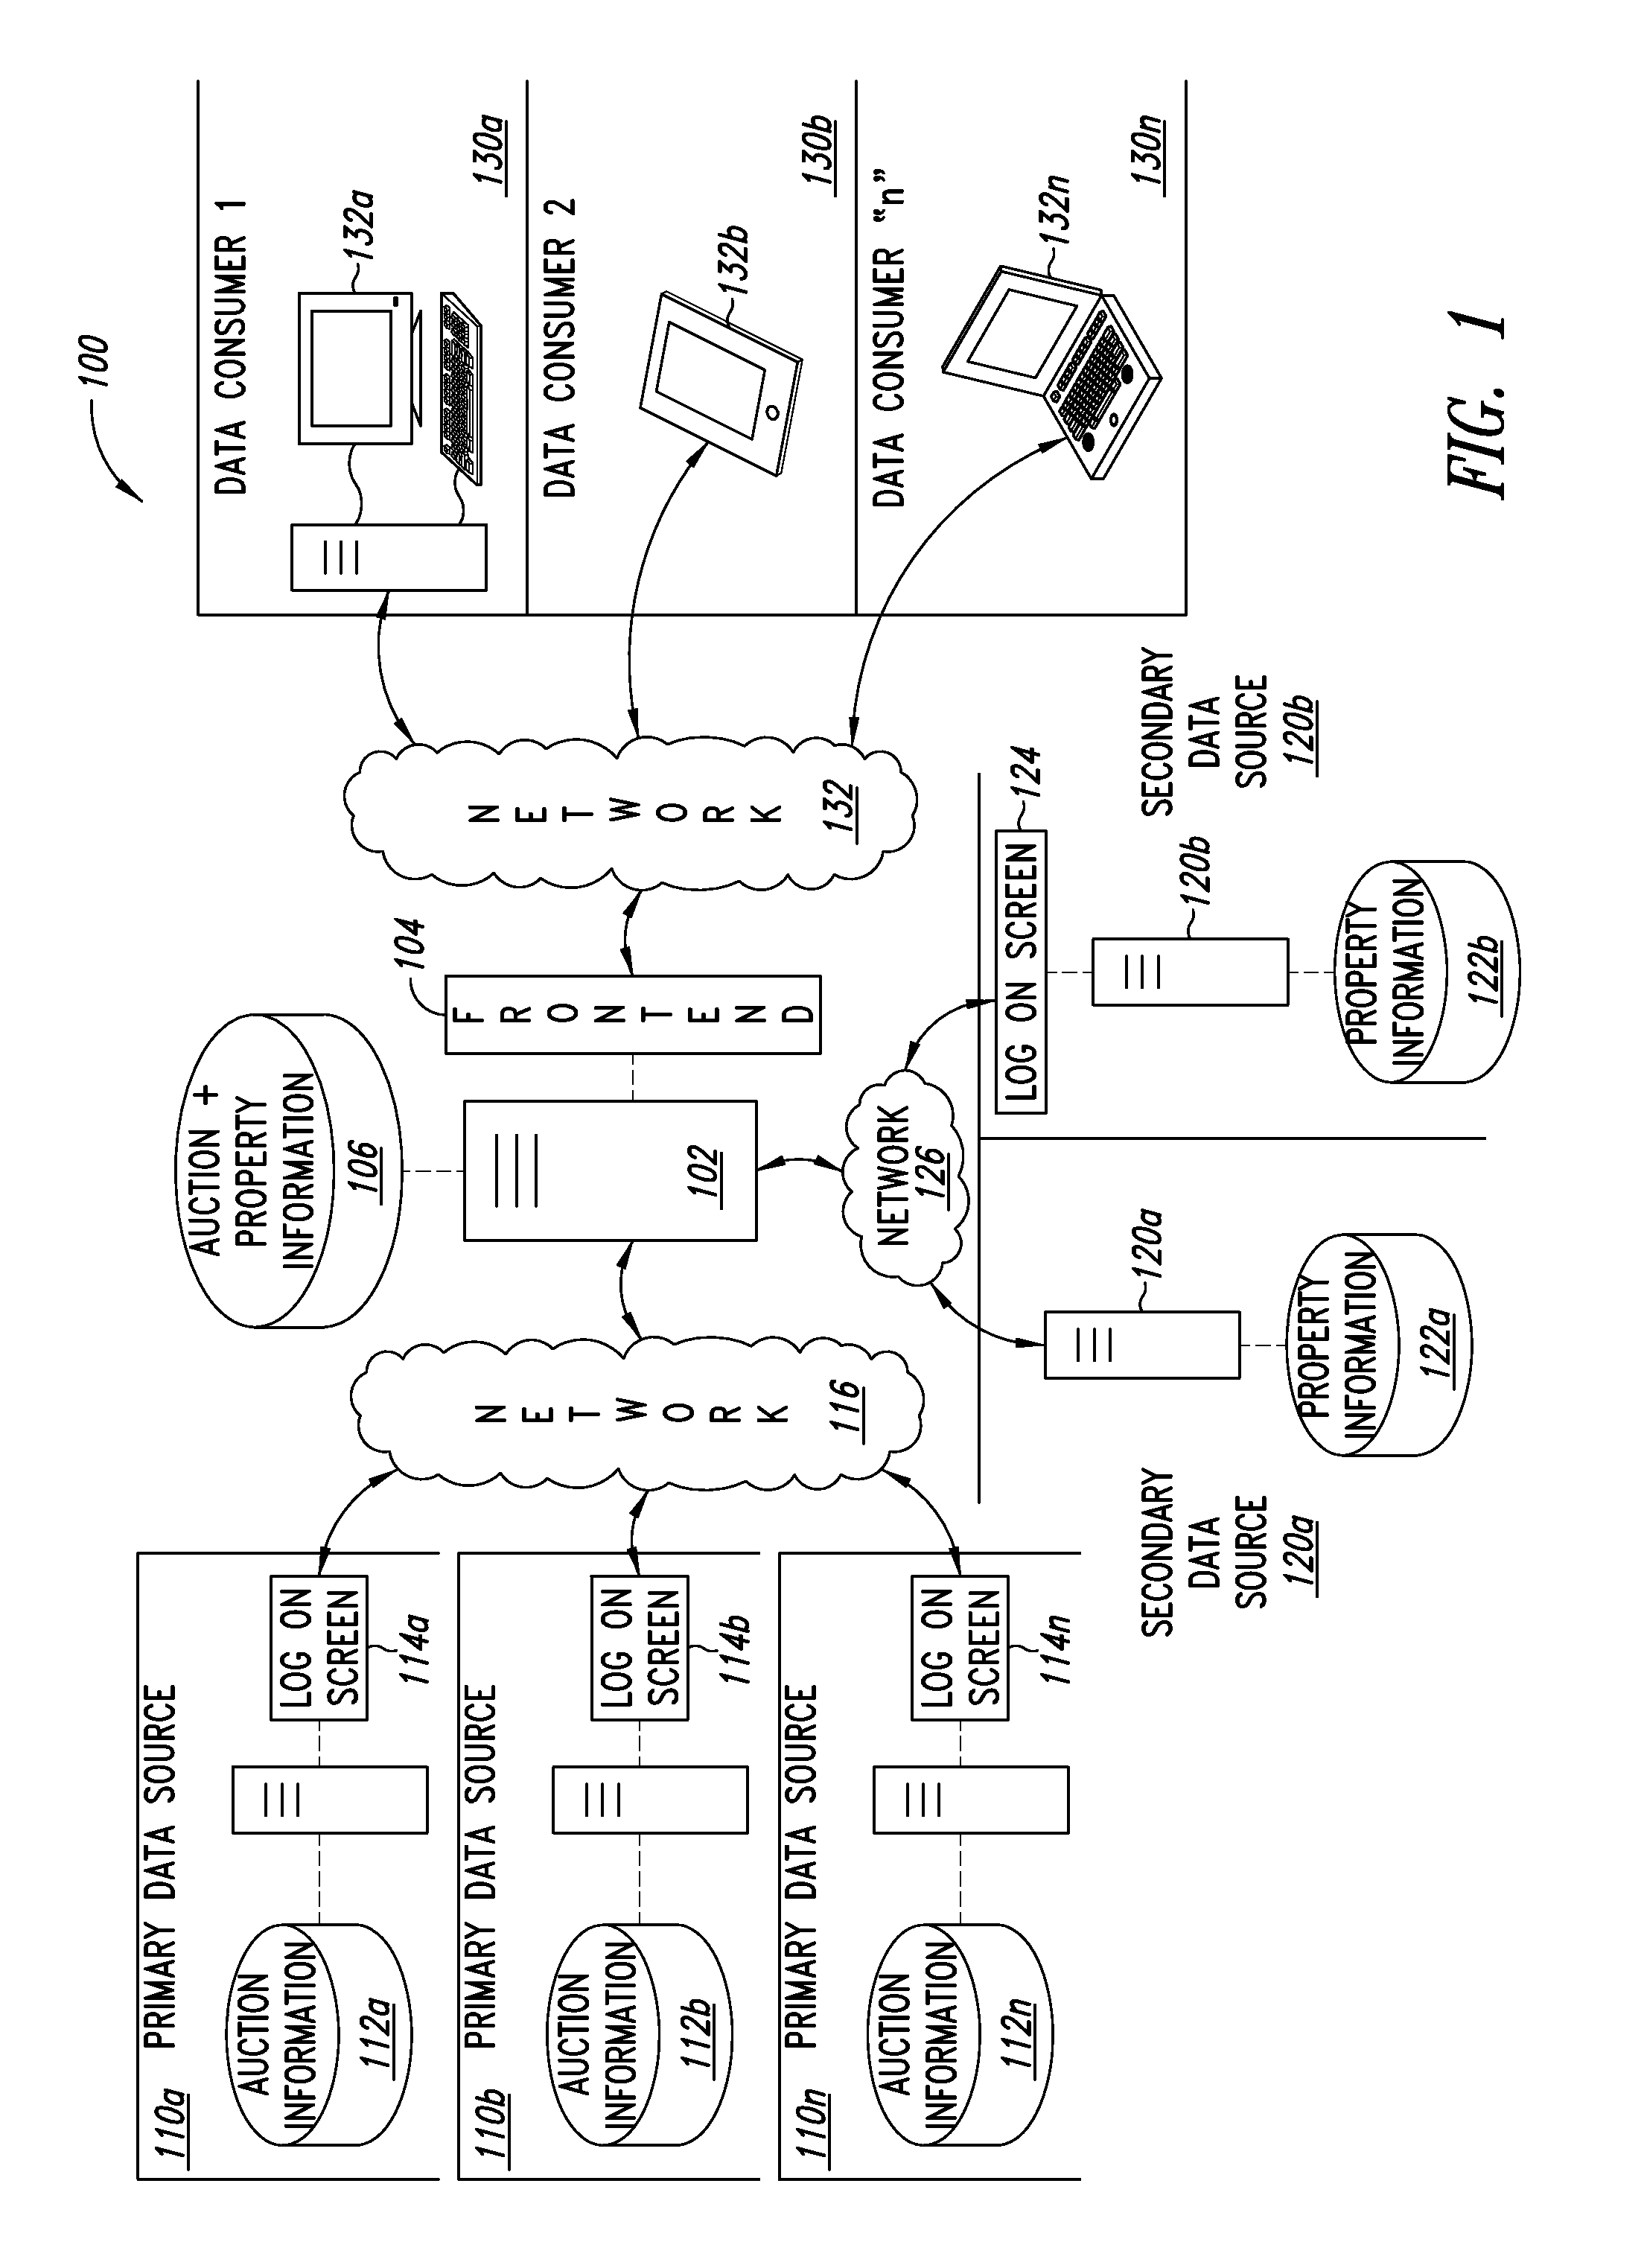 Parcel data collection and analysis systems, devices, and methods